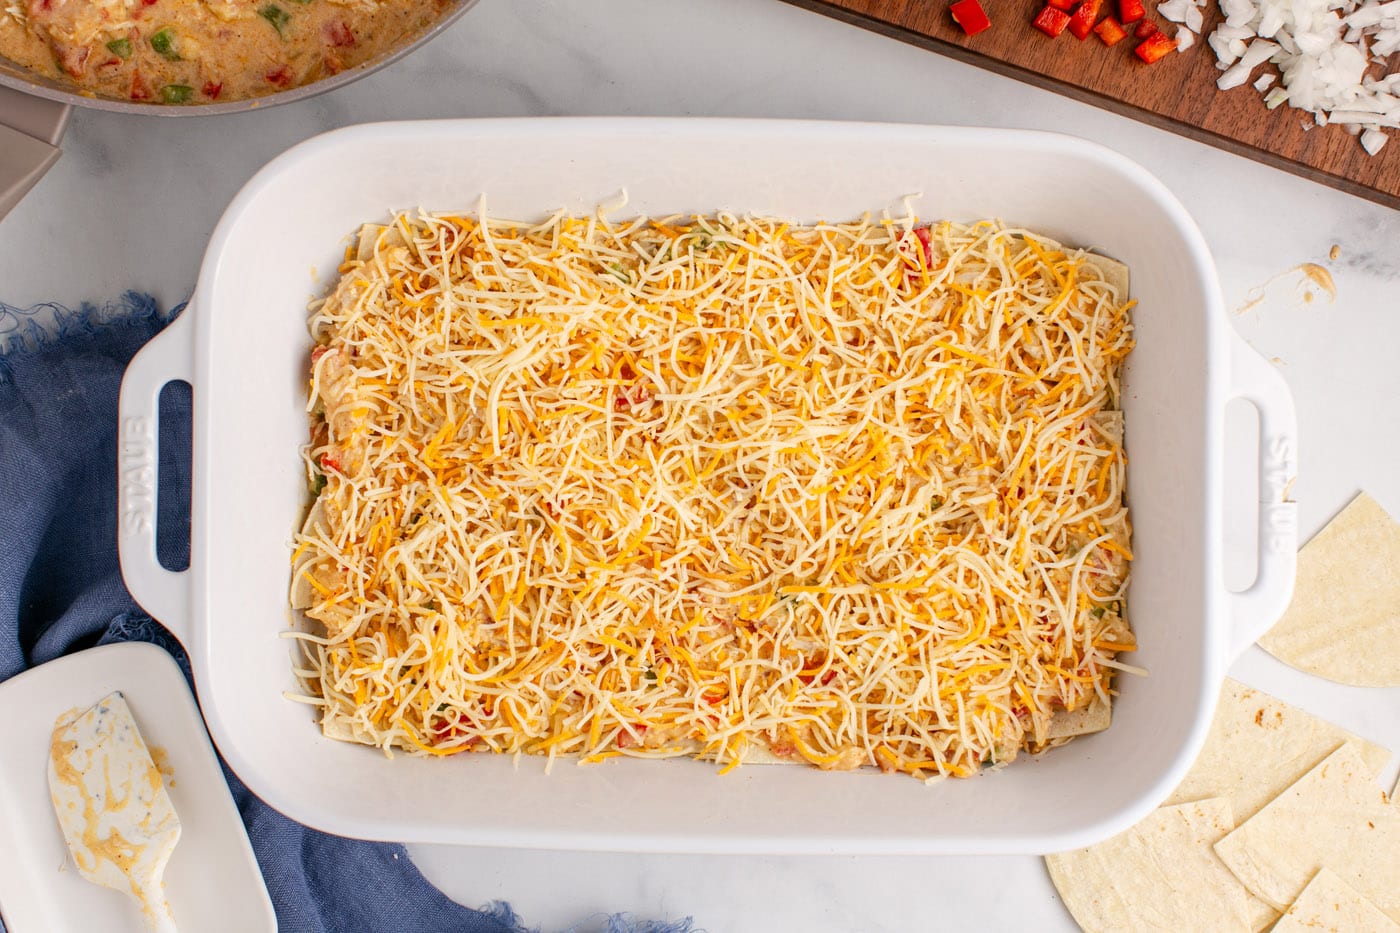 shredded cheese layered over chicken sauce in a baking dish